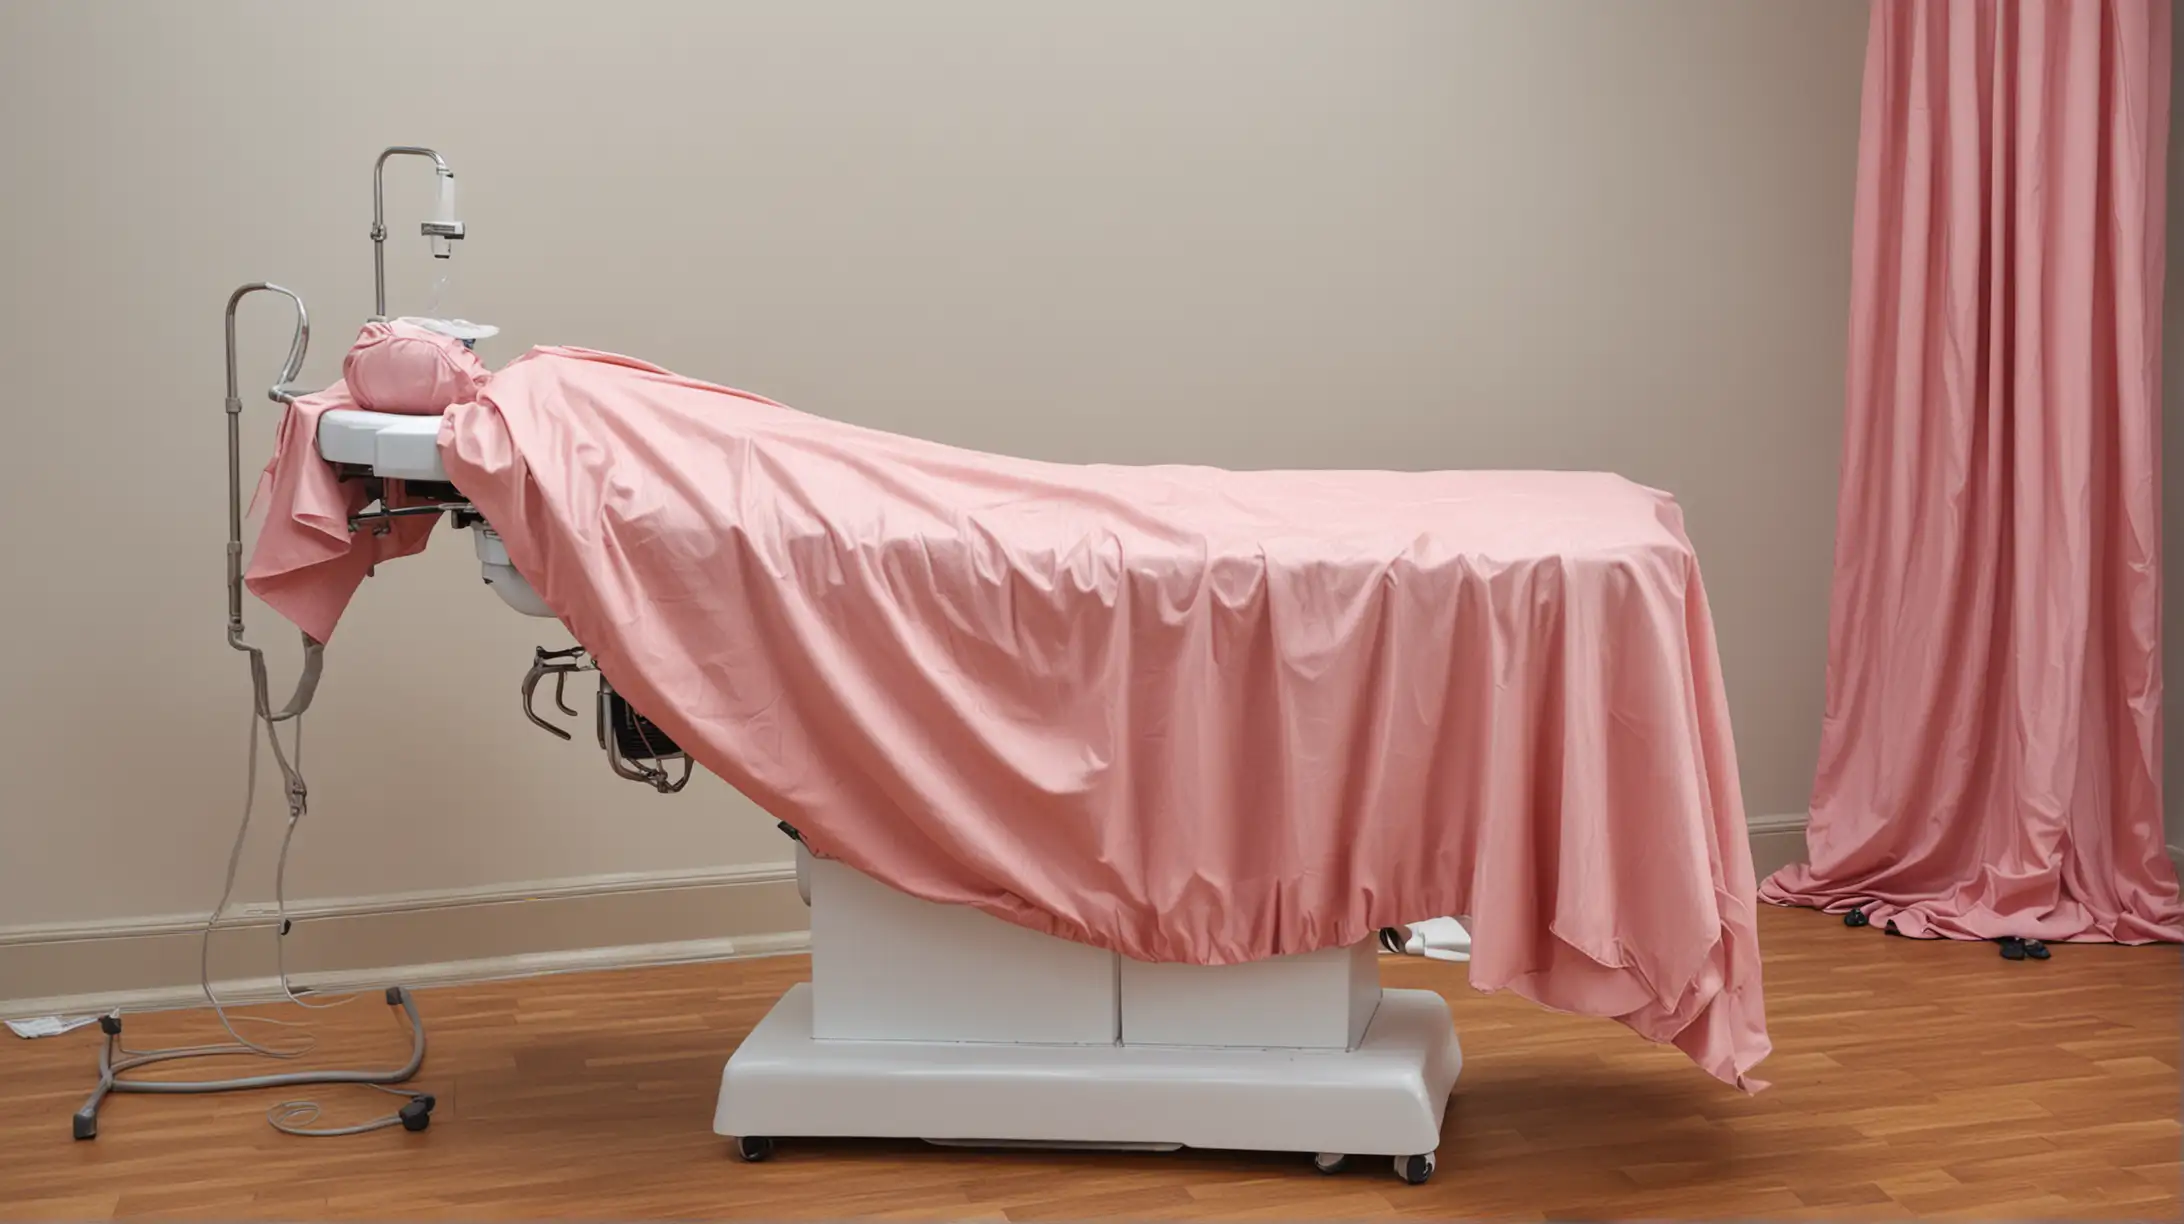 Gynecologist Examination Room with Draped Table